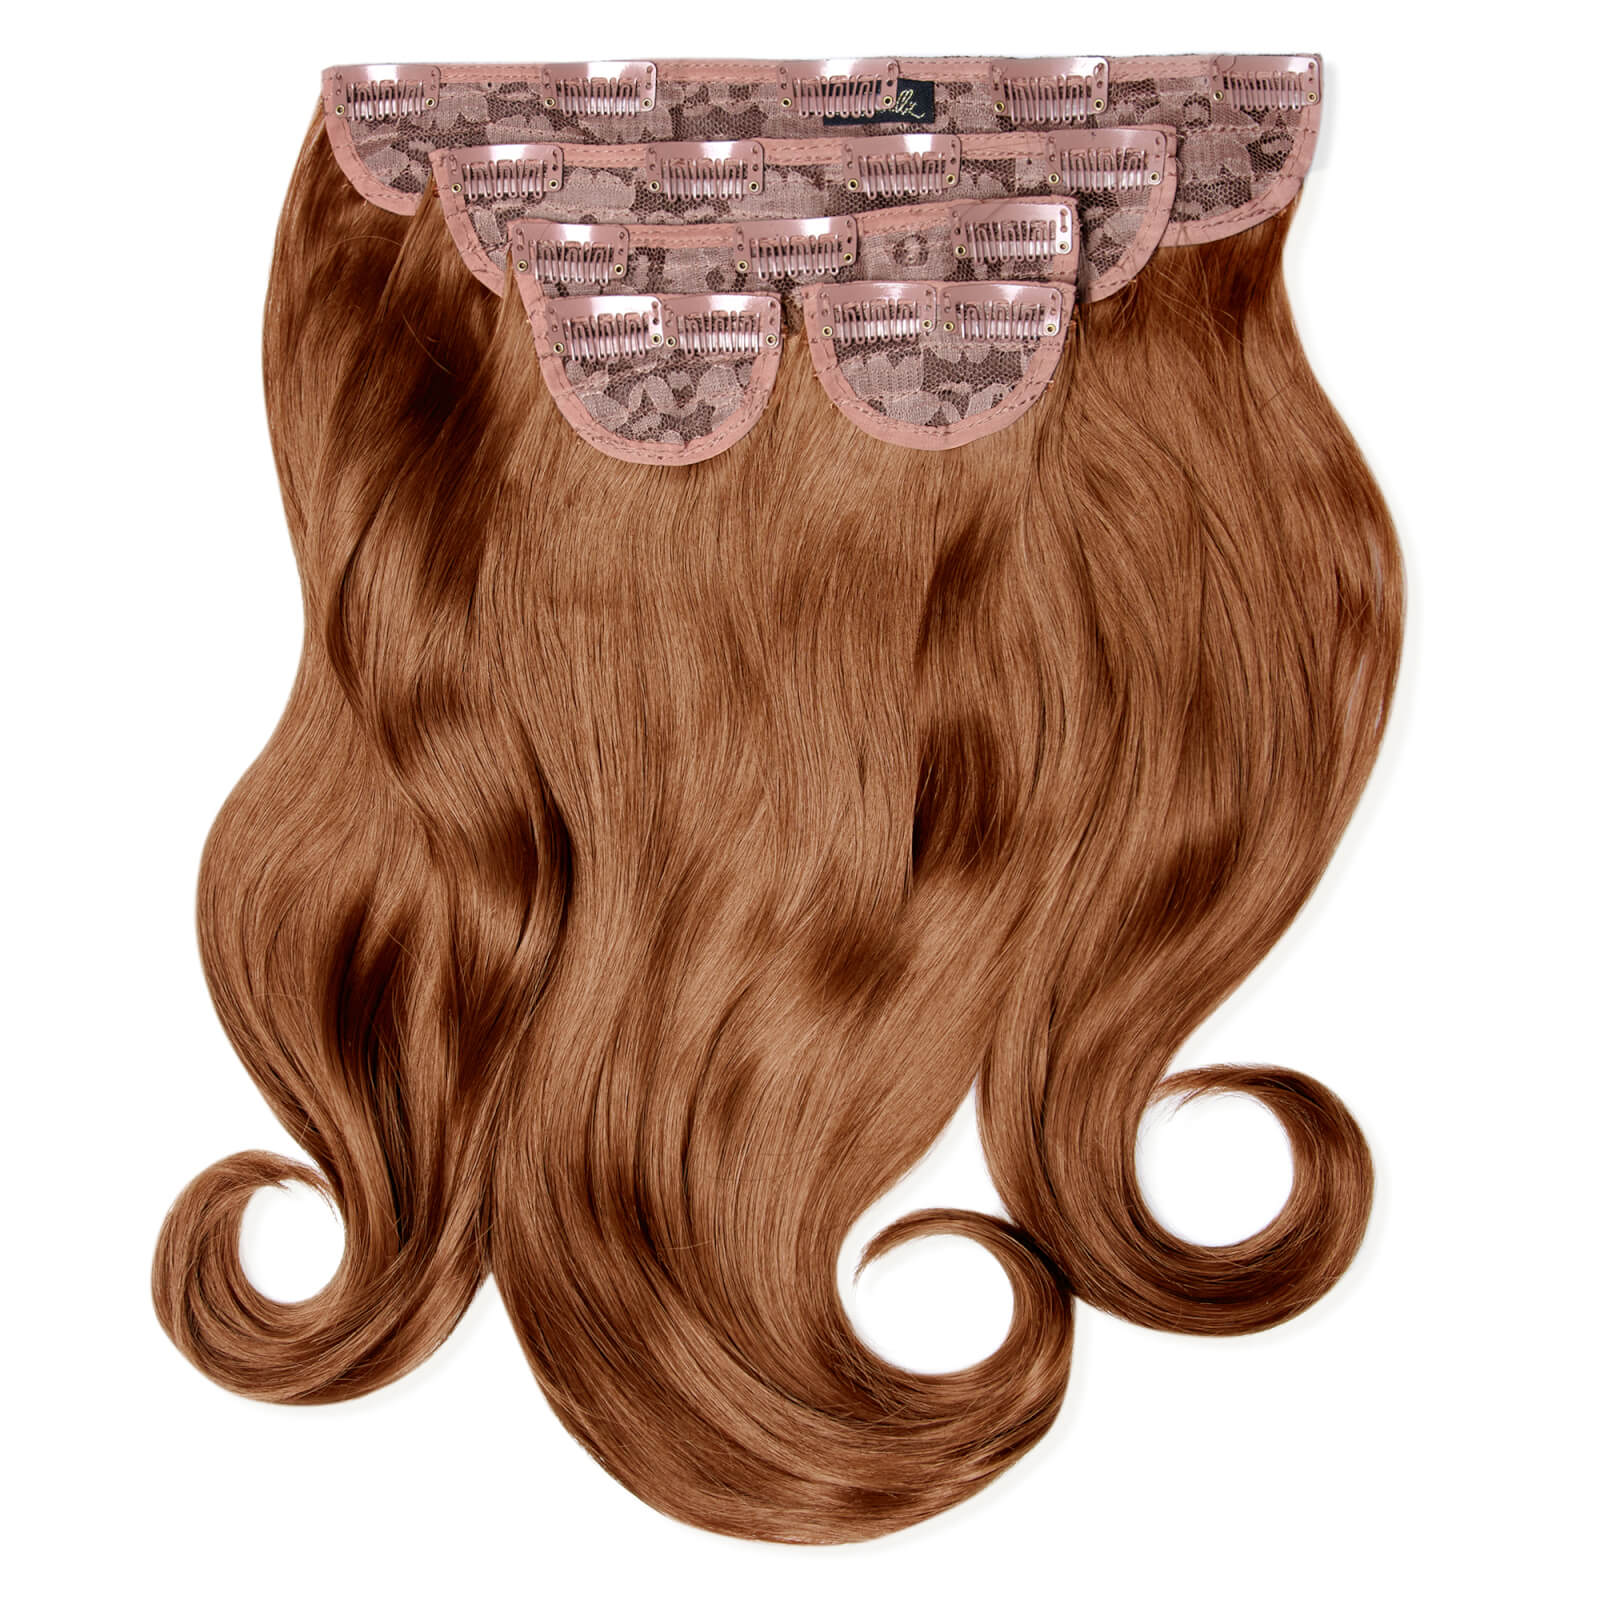 Lullabellz Super Thick 16  5 Piece Blow Dry Wavy Clip In Extensions (various Shades) - Mixed Auburn